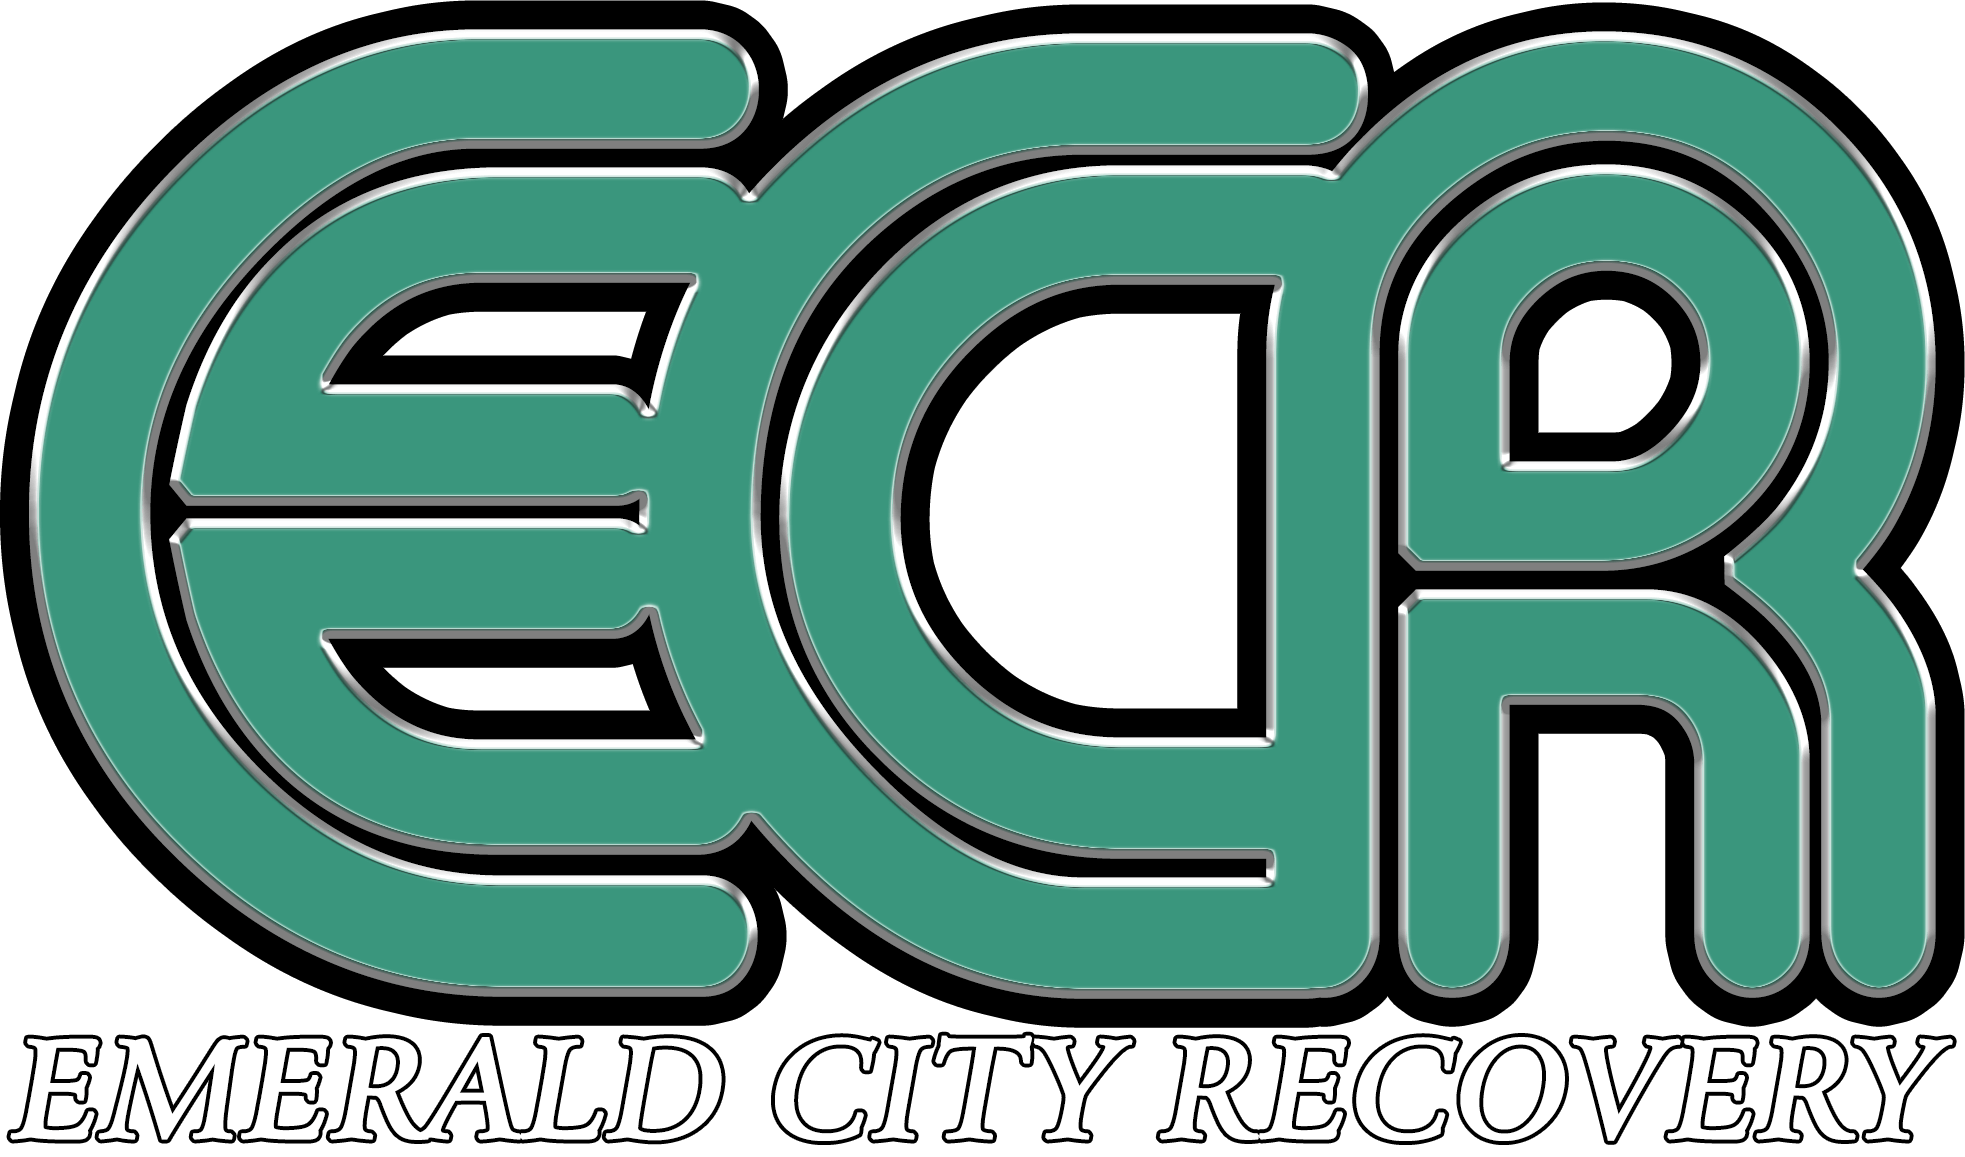 Emerald City Recovery provides professional skip trace services in Washington state!